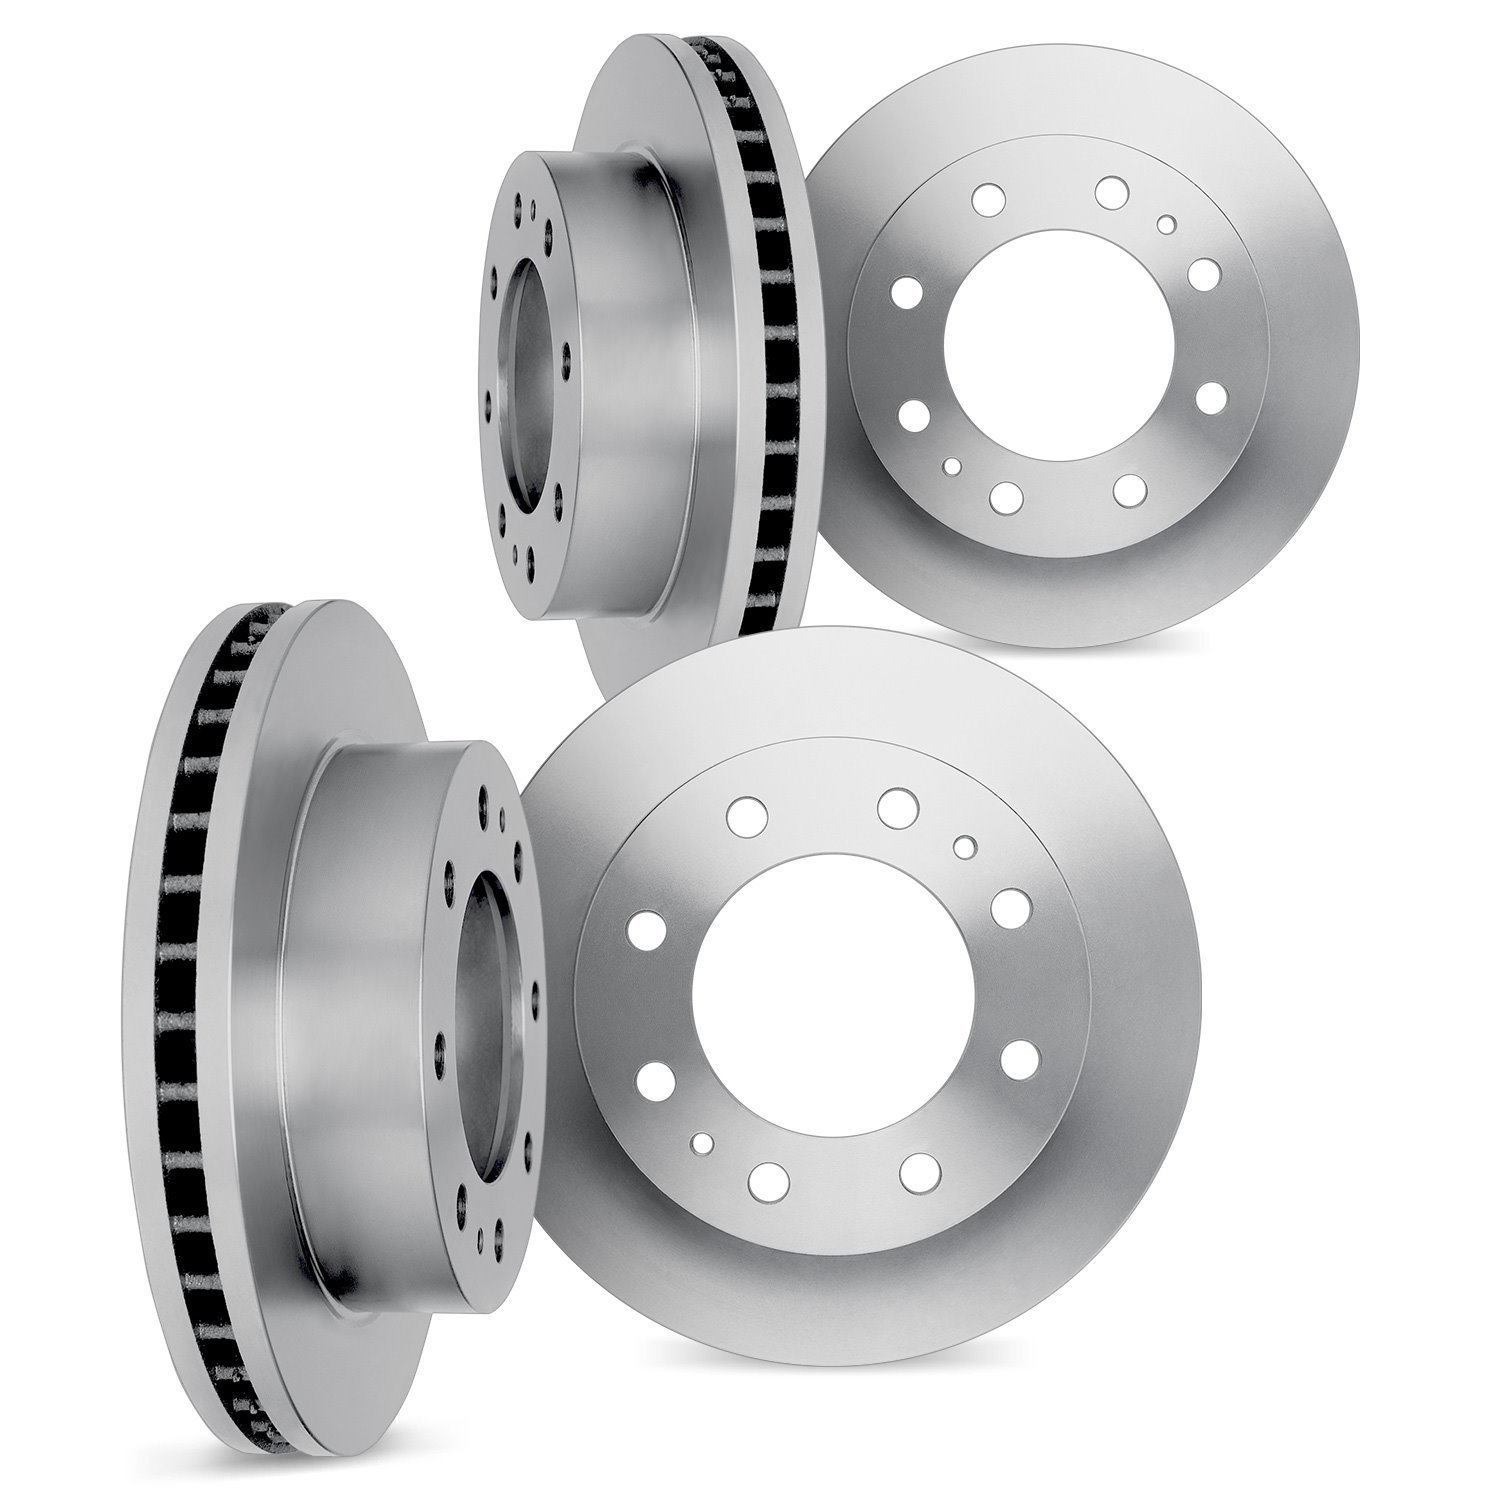 6004-54310 Brake Rotors, Fits Select Ford/Lincoln/Mercury/Mazda, Position: Front and Rear